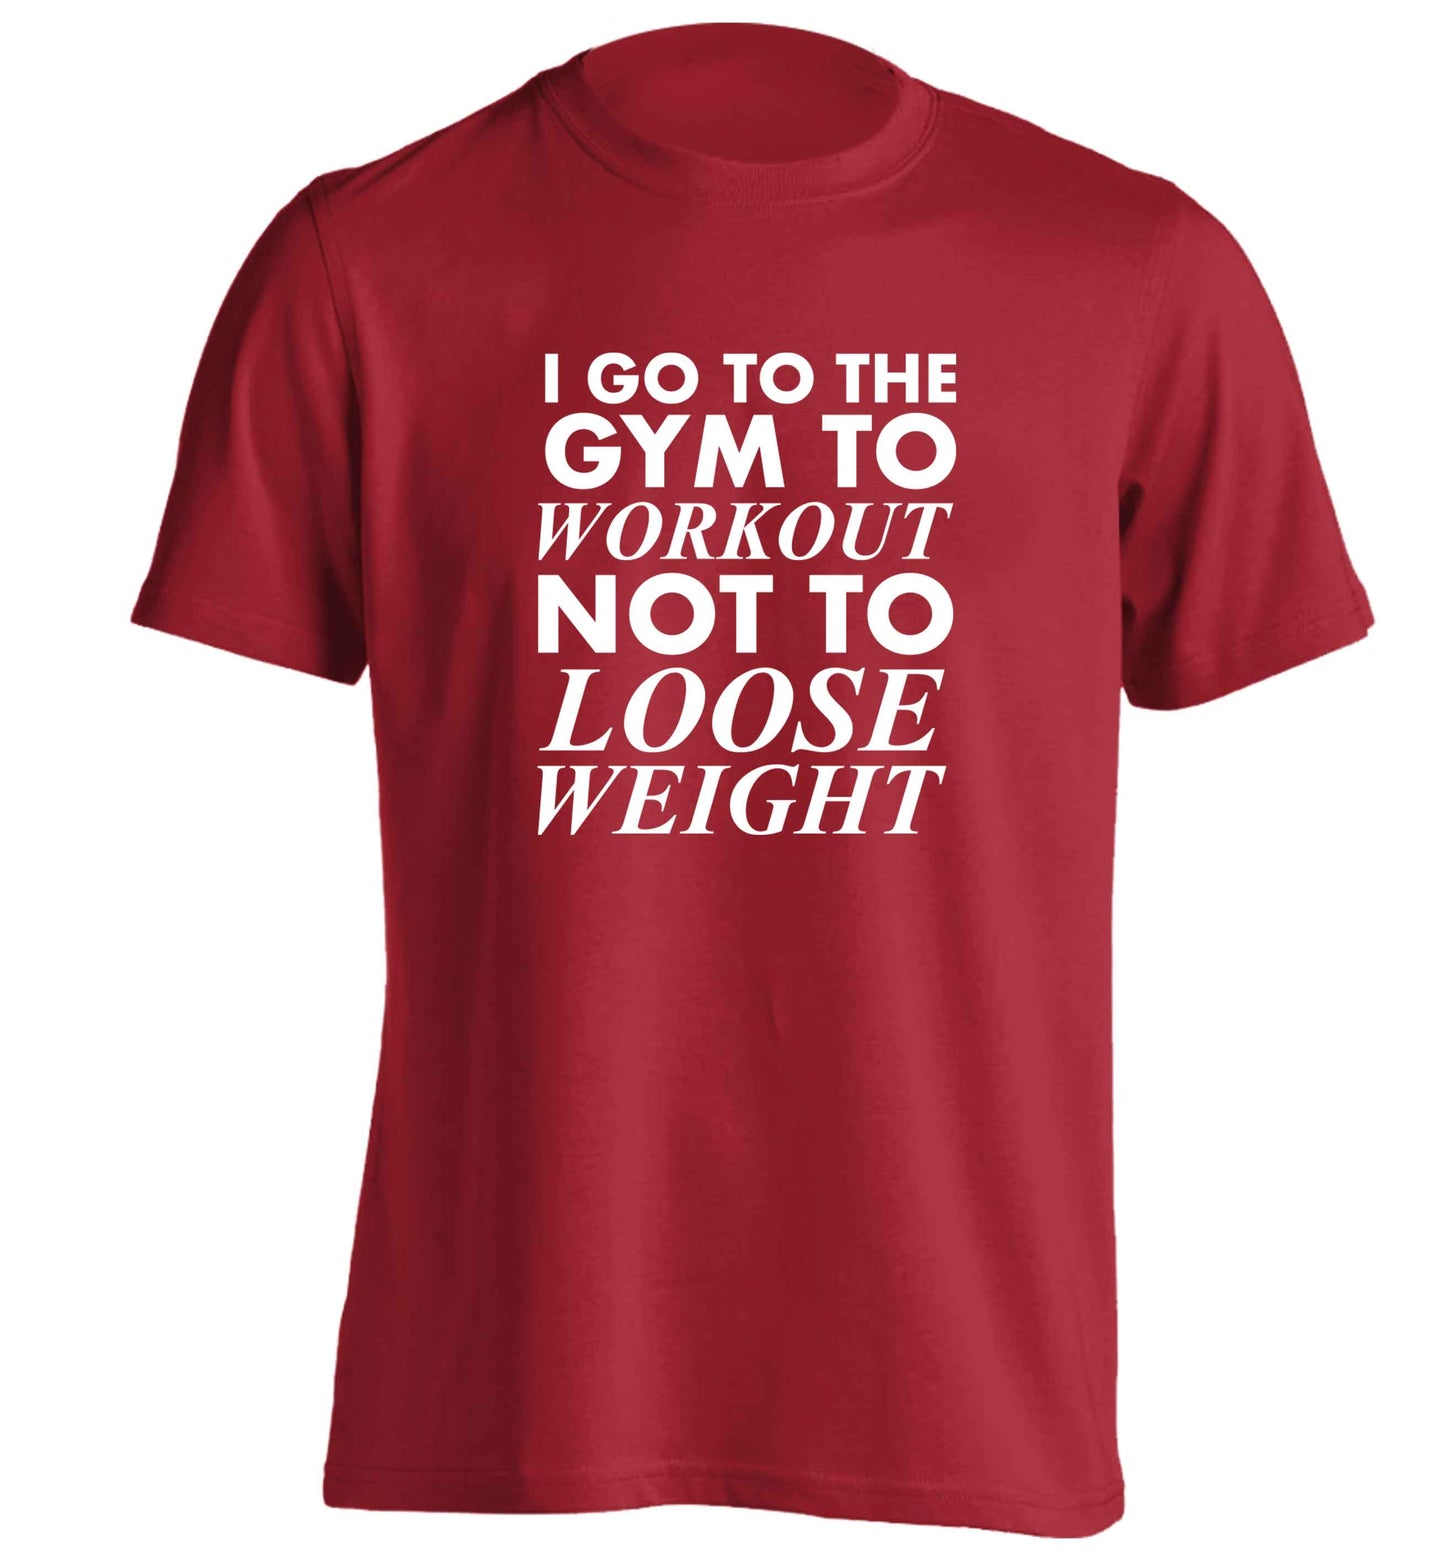 I go to the gym to workout not to loose weight adults unisex red Tshirt 2XL